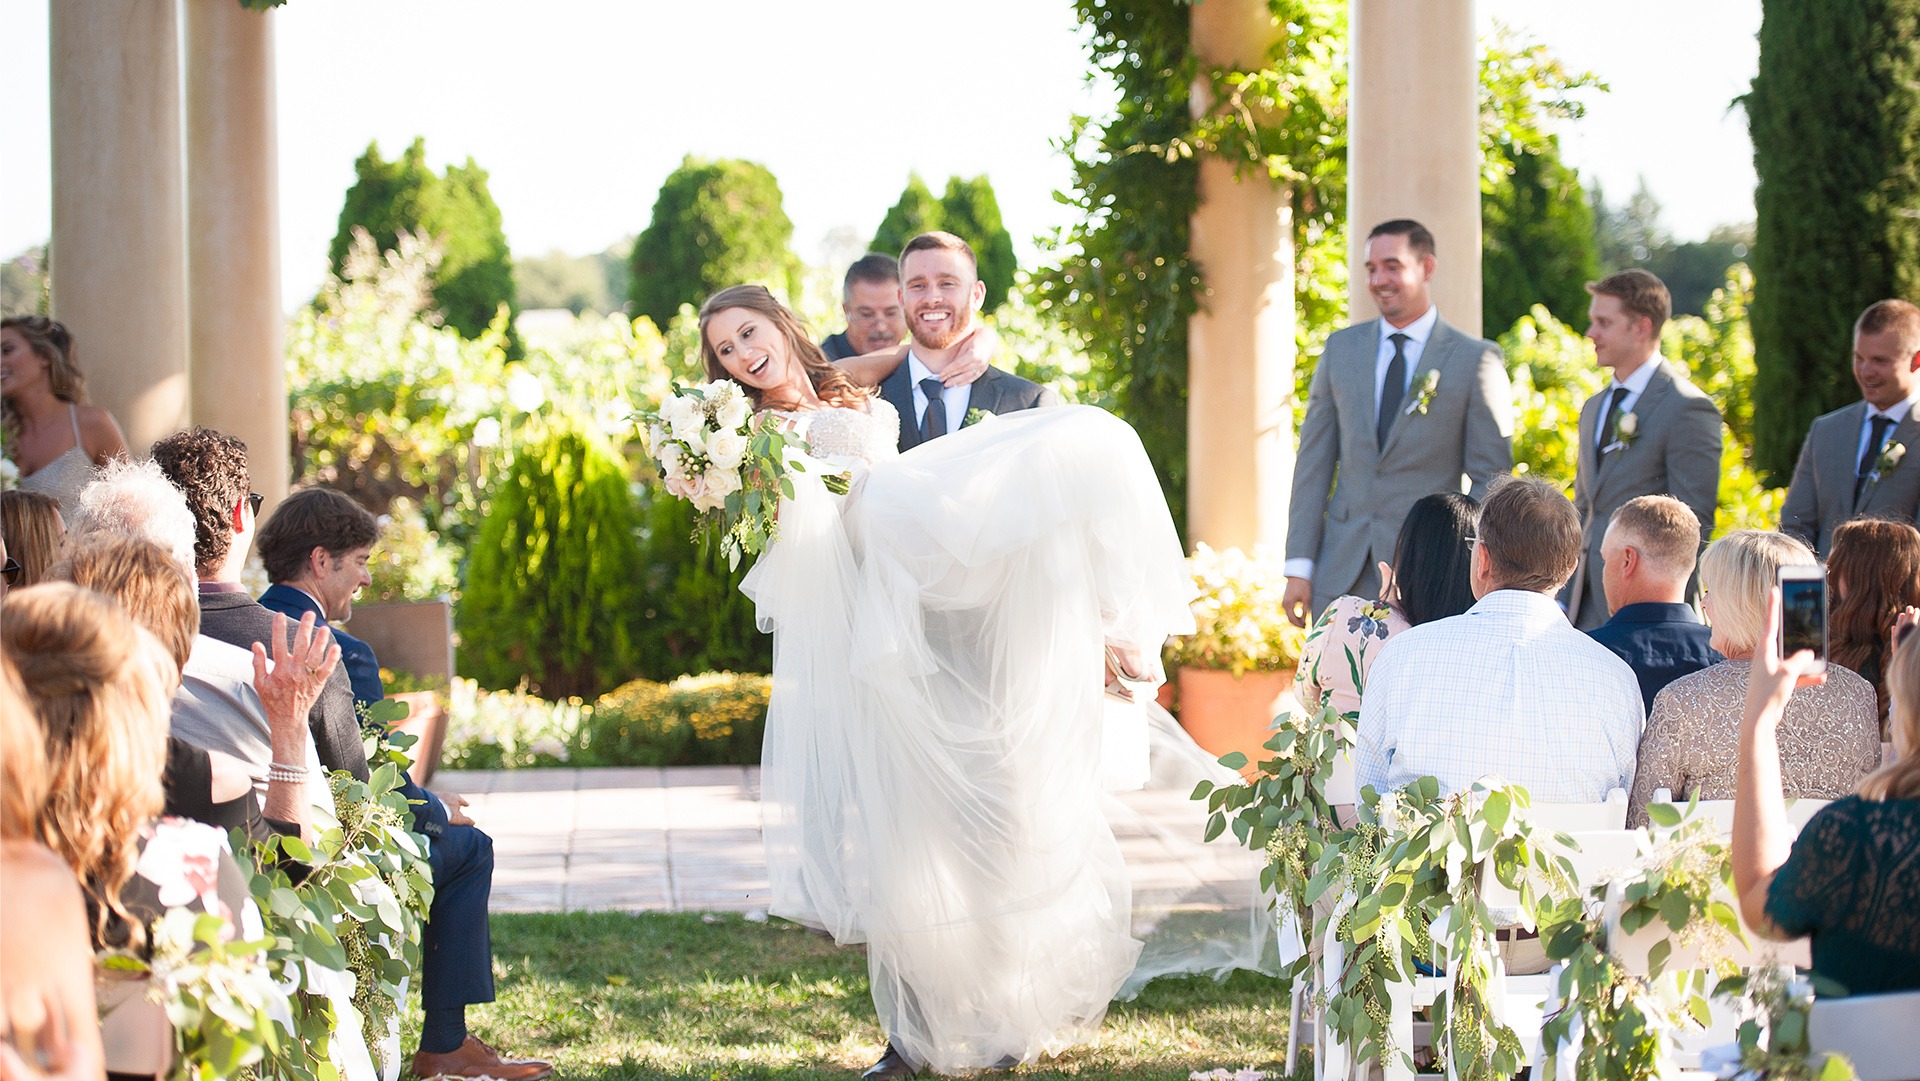 A Napa Valley, northern California wedding expertly planned by Samar Hattar of Blissful Events